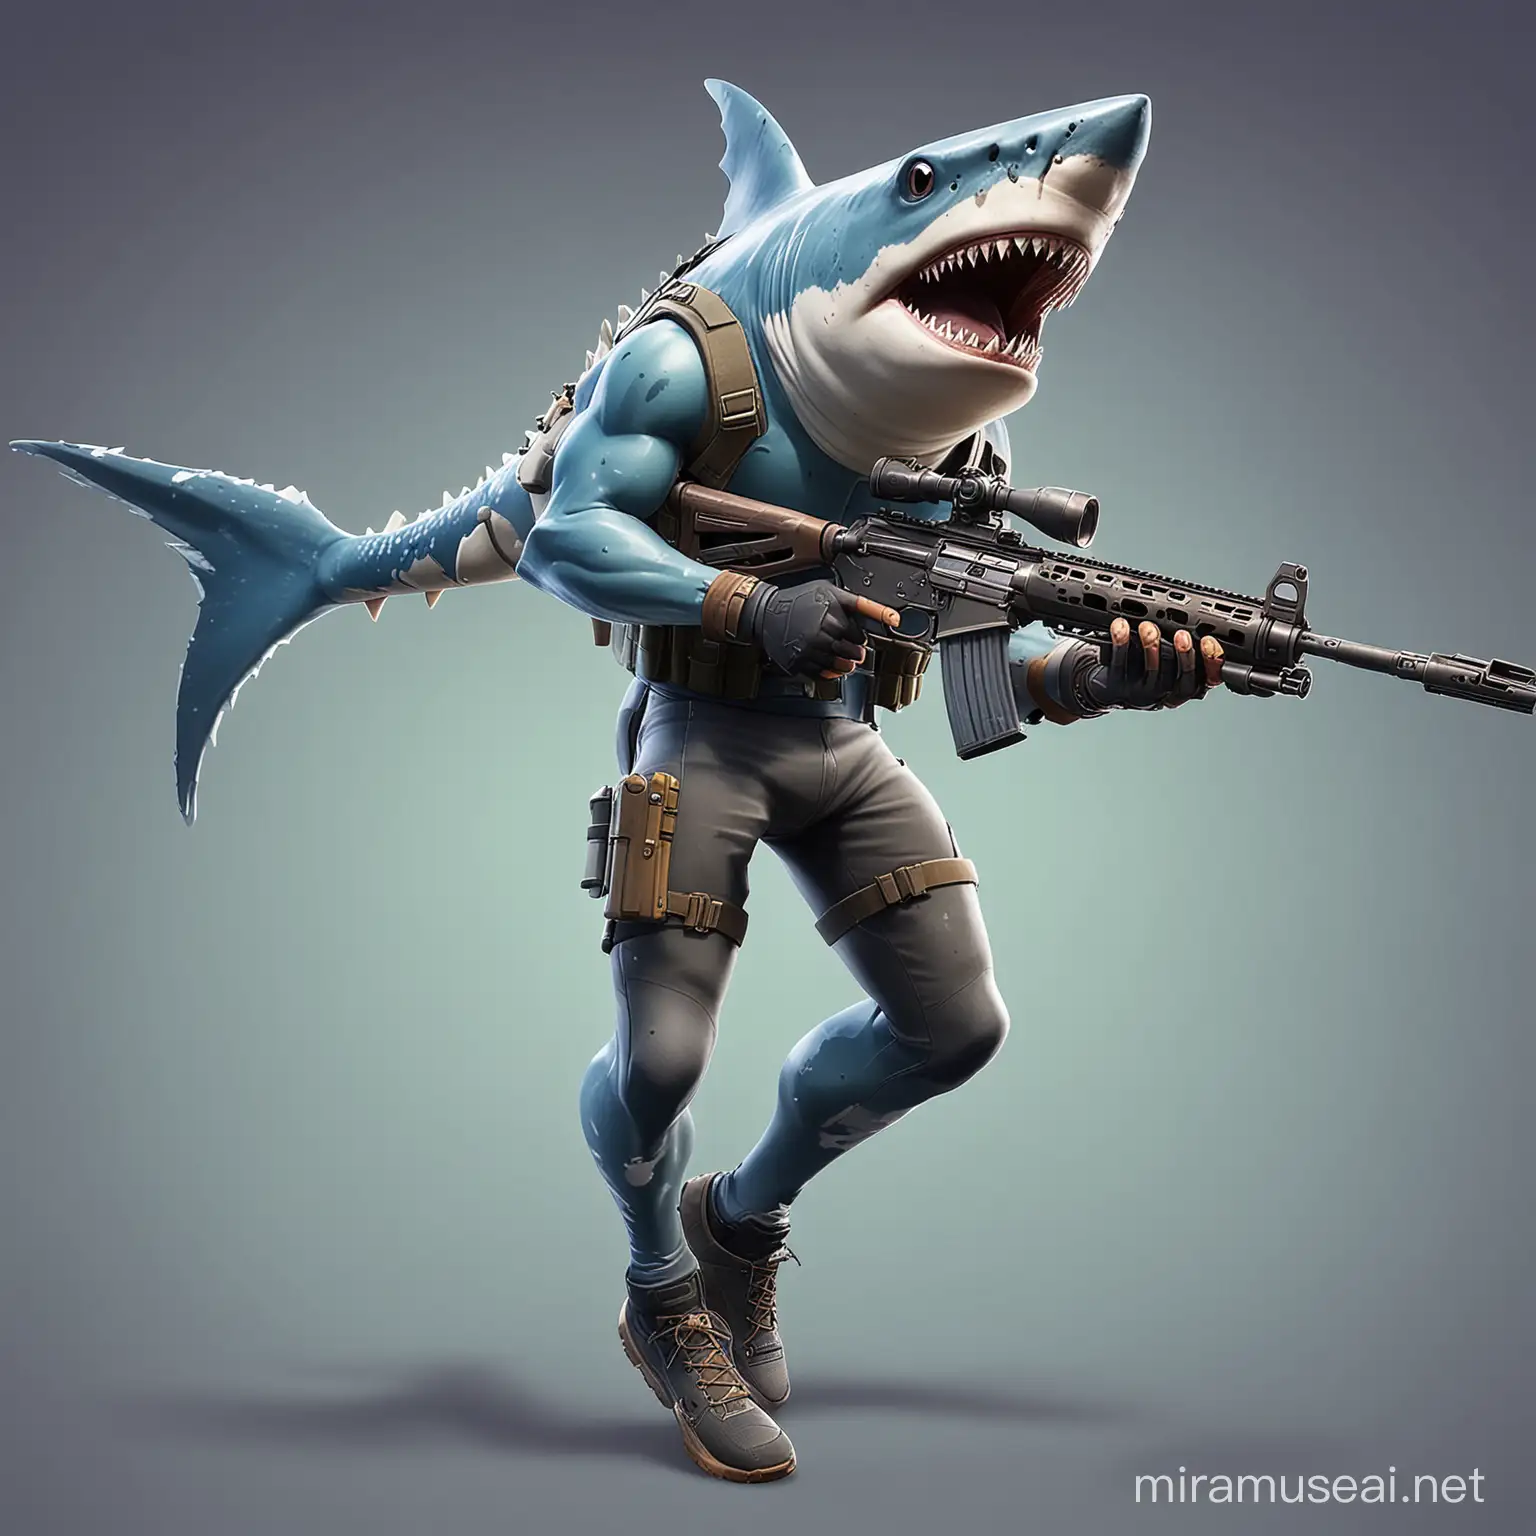 A shark-like skin in Fortnite holding a sniper rifle and running